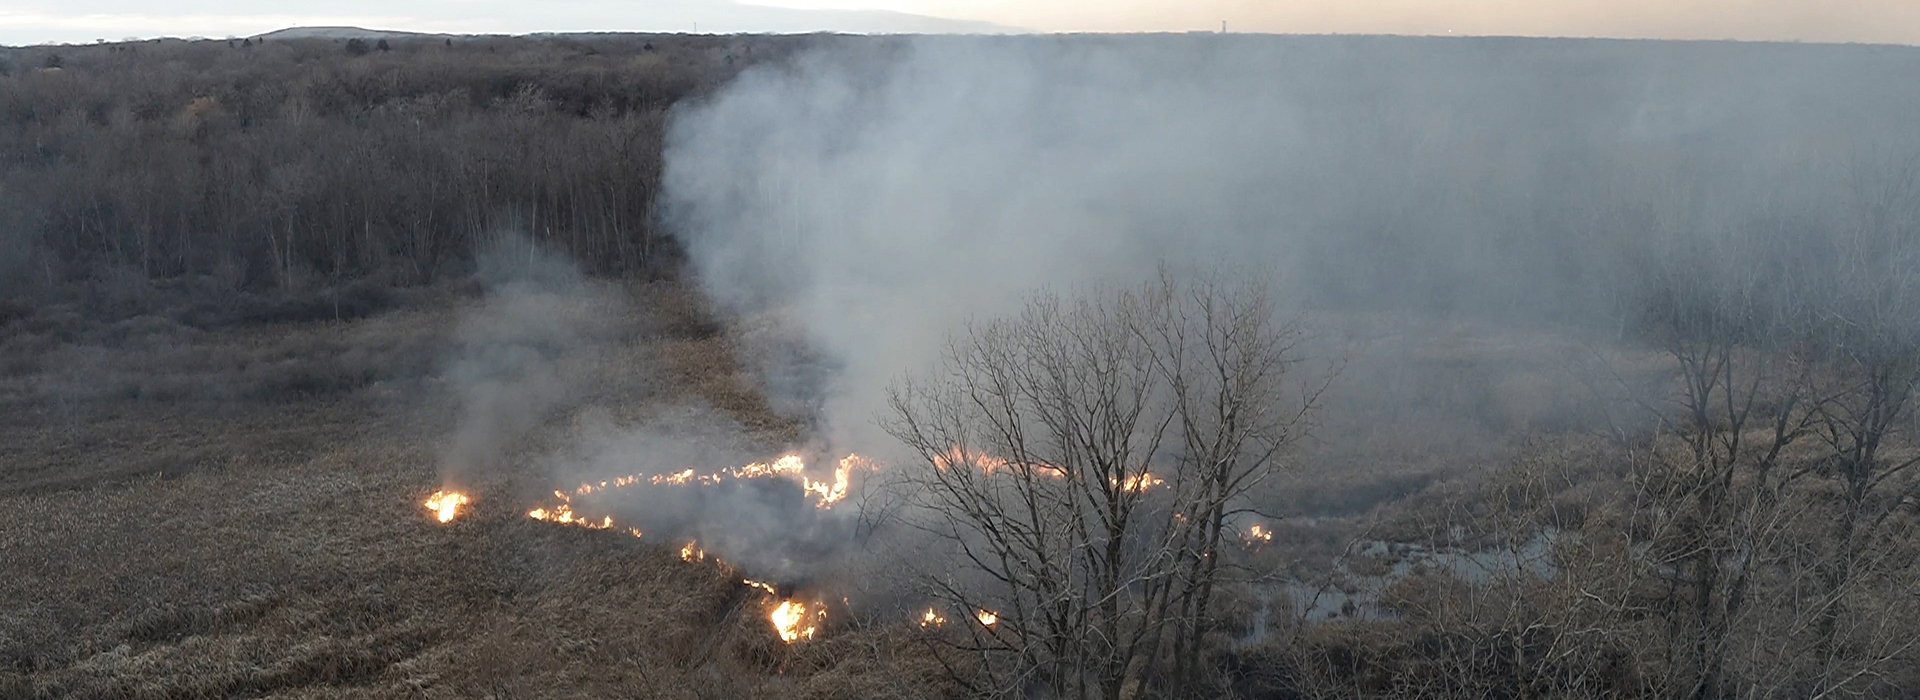 Drone Arrival at prescribed burn at Illinois state park